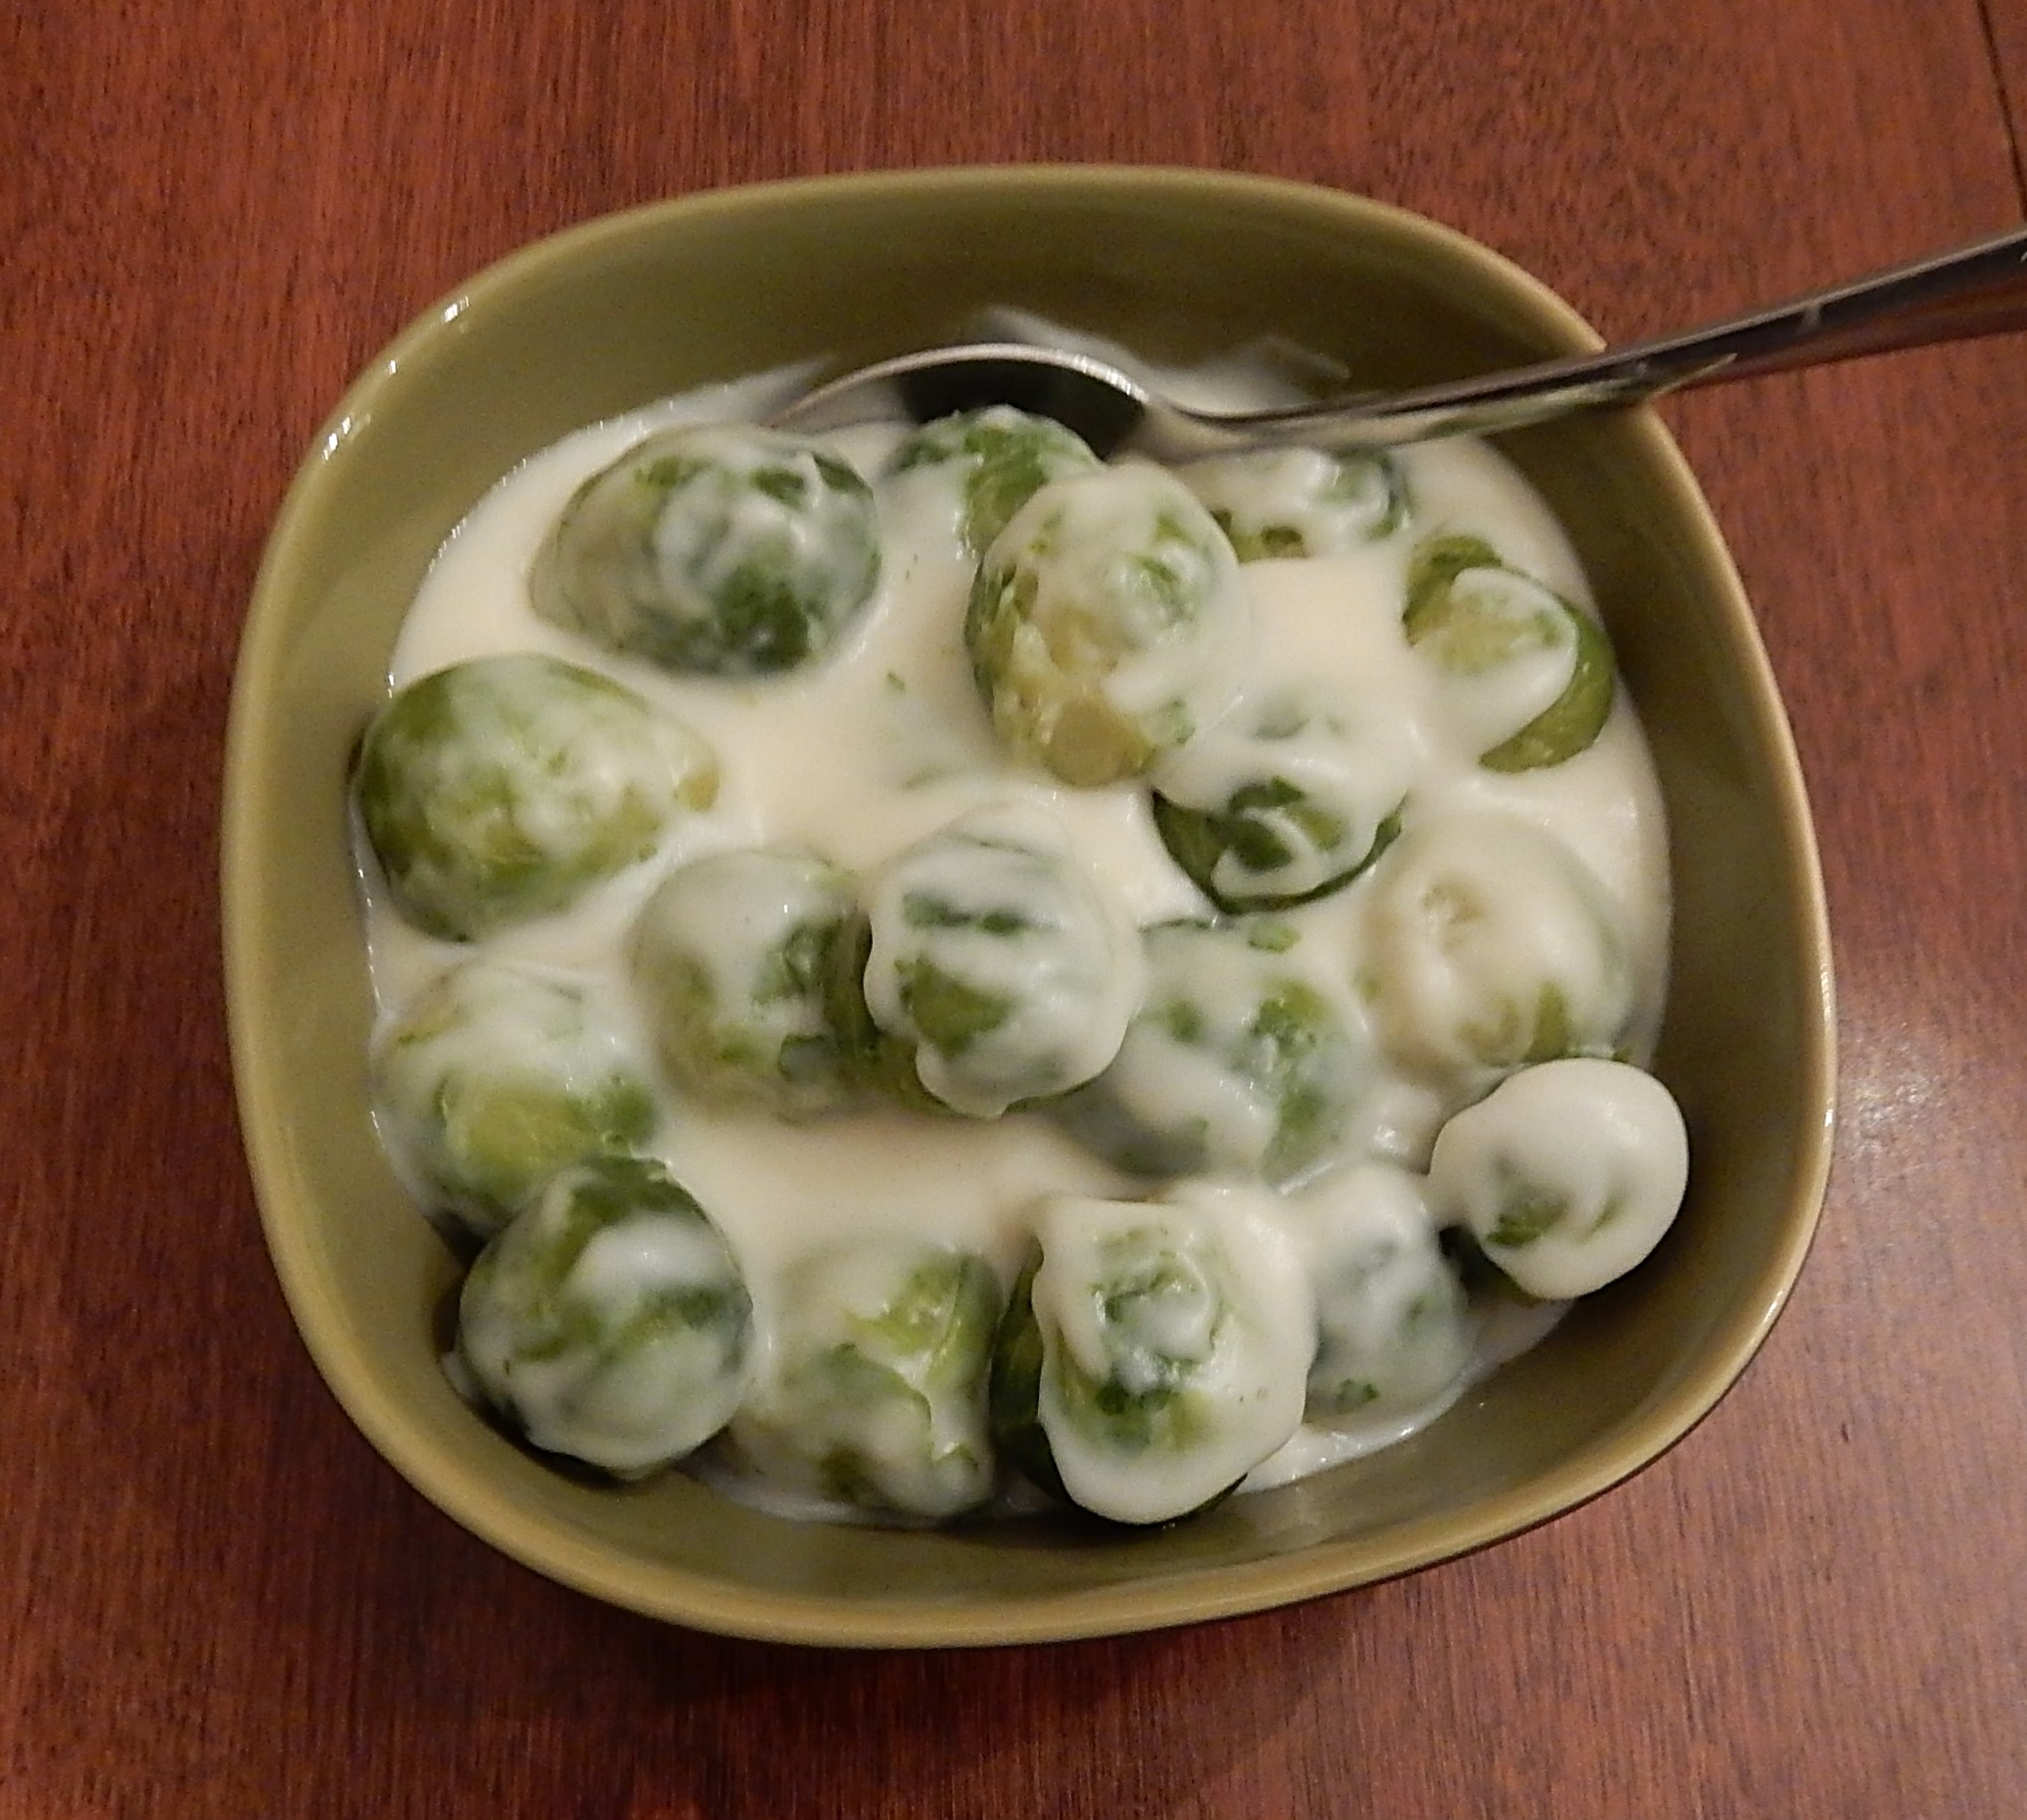 Brussels Sprouts with Cream Sauce in Dish